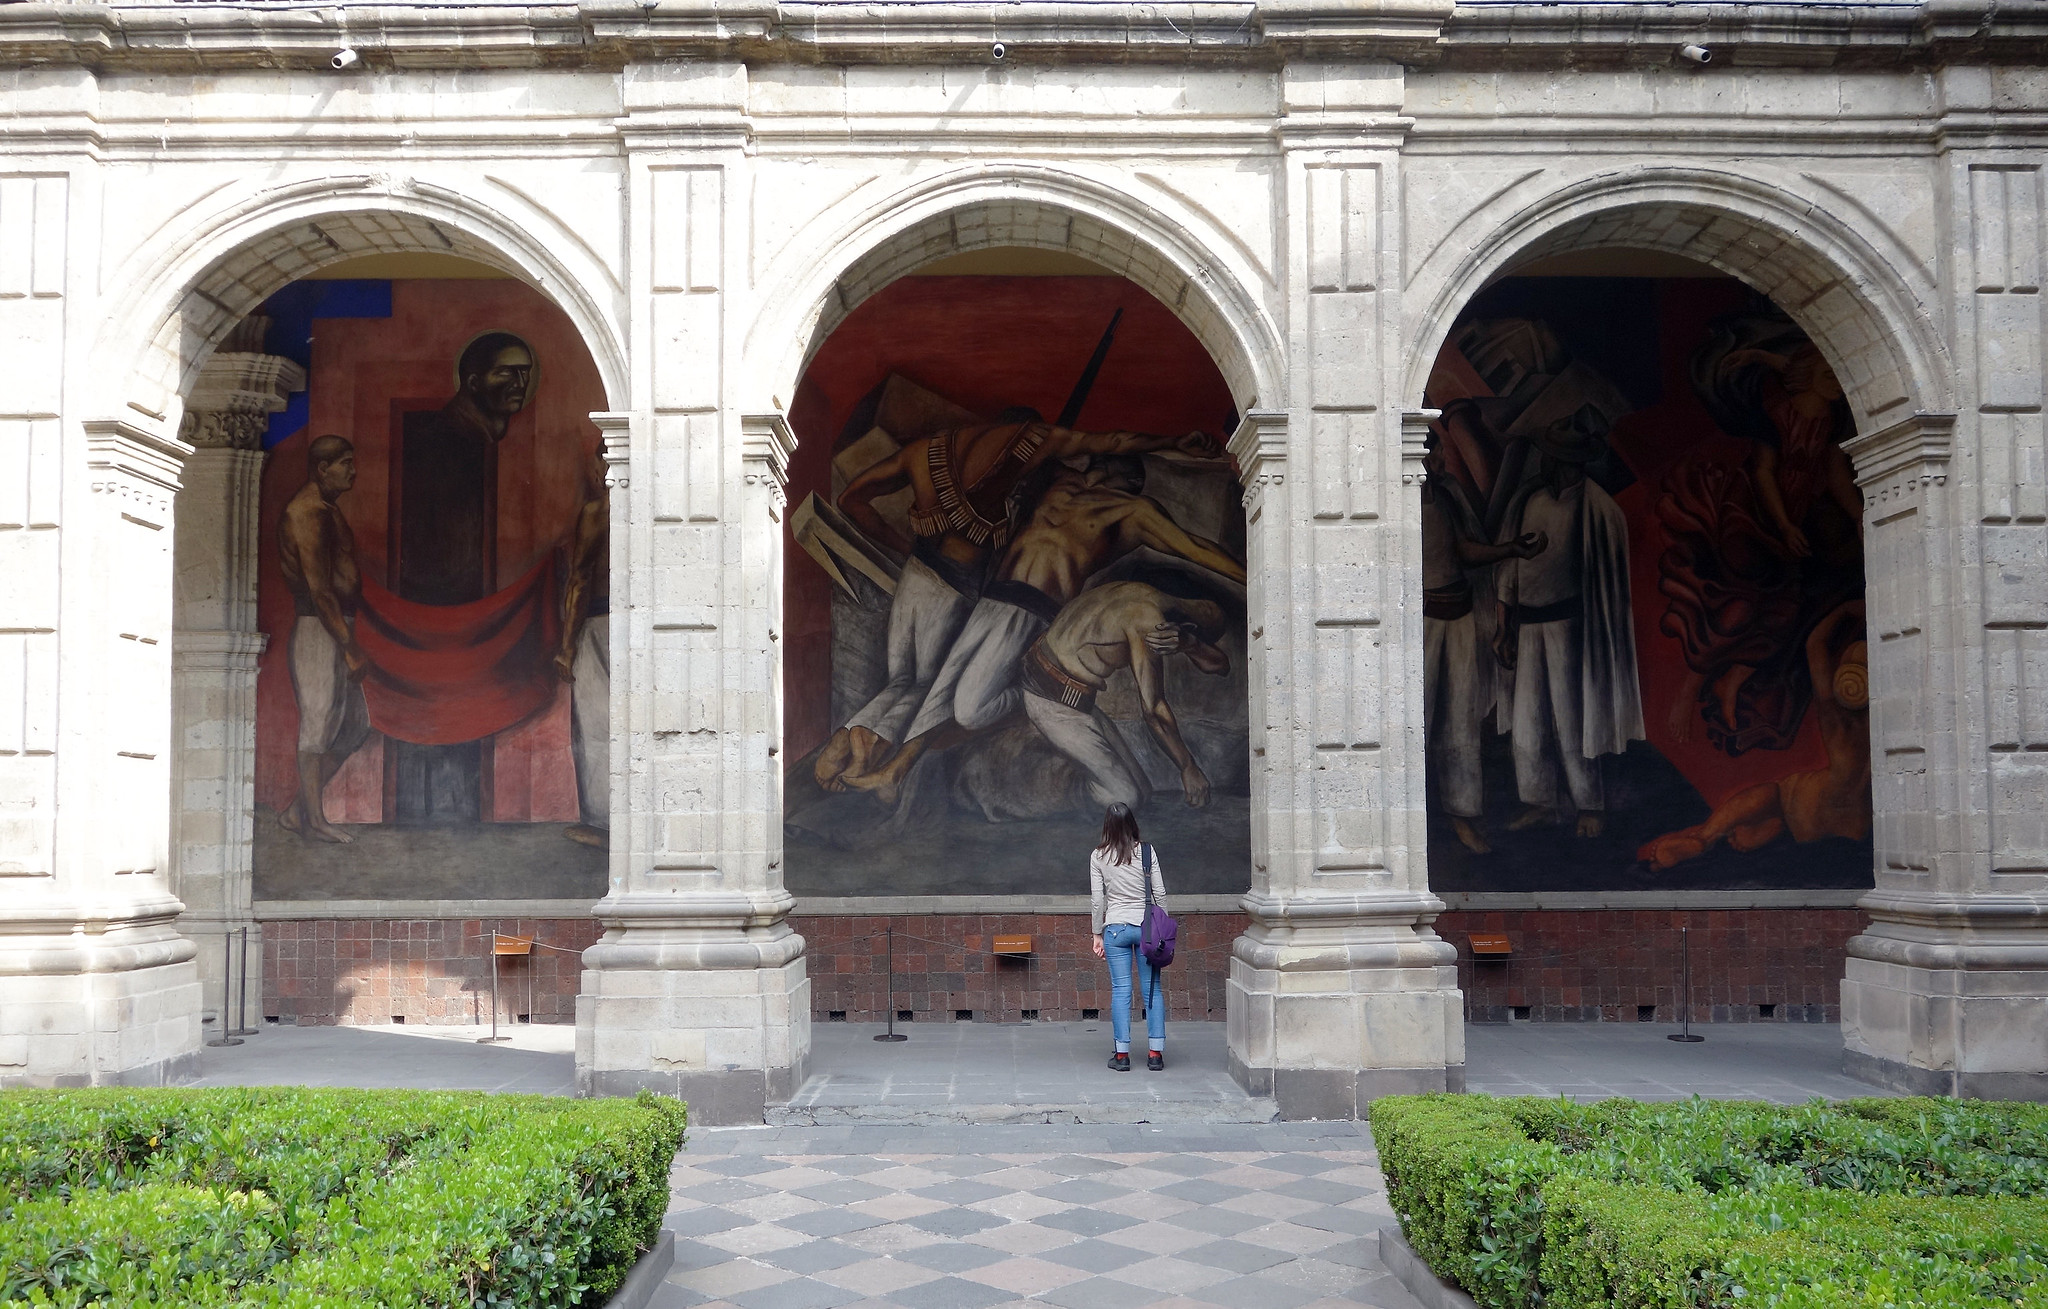 José Clemente Orozco, The Trench (center arch), San Ildefonso College courtyard, begun 1923, Mexico City